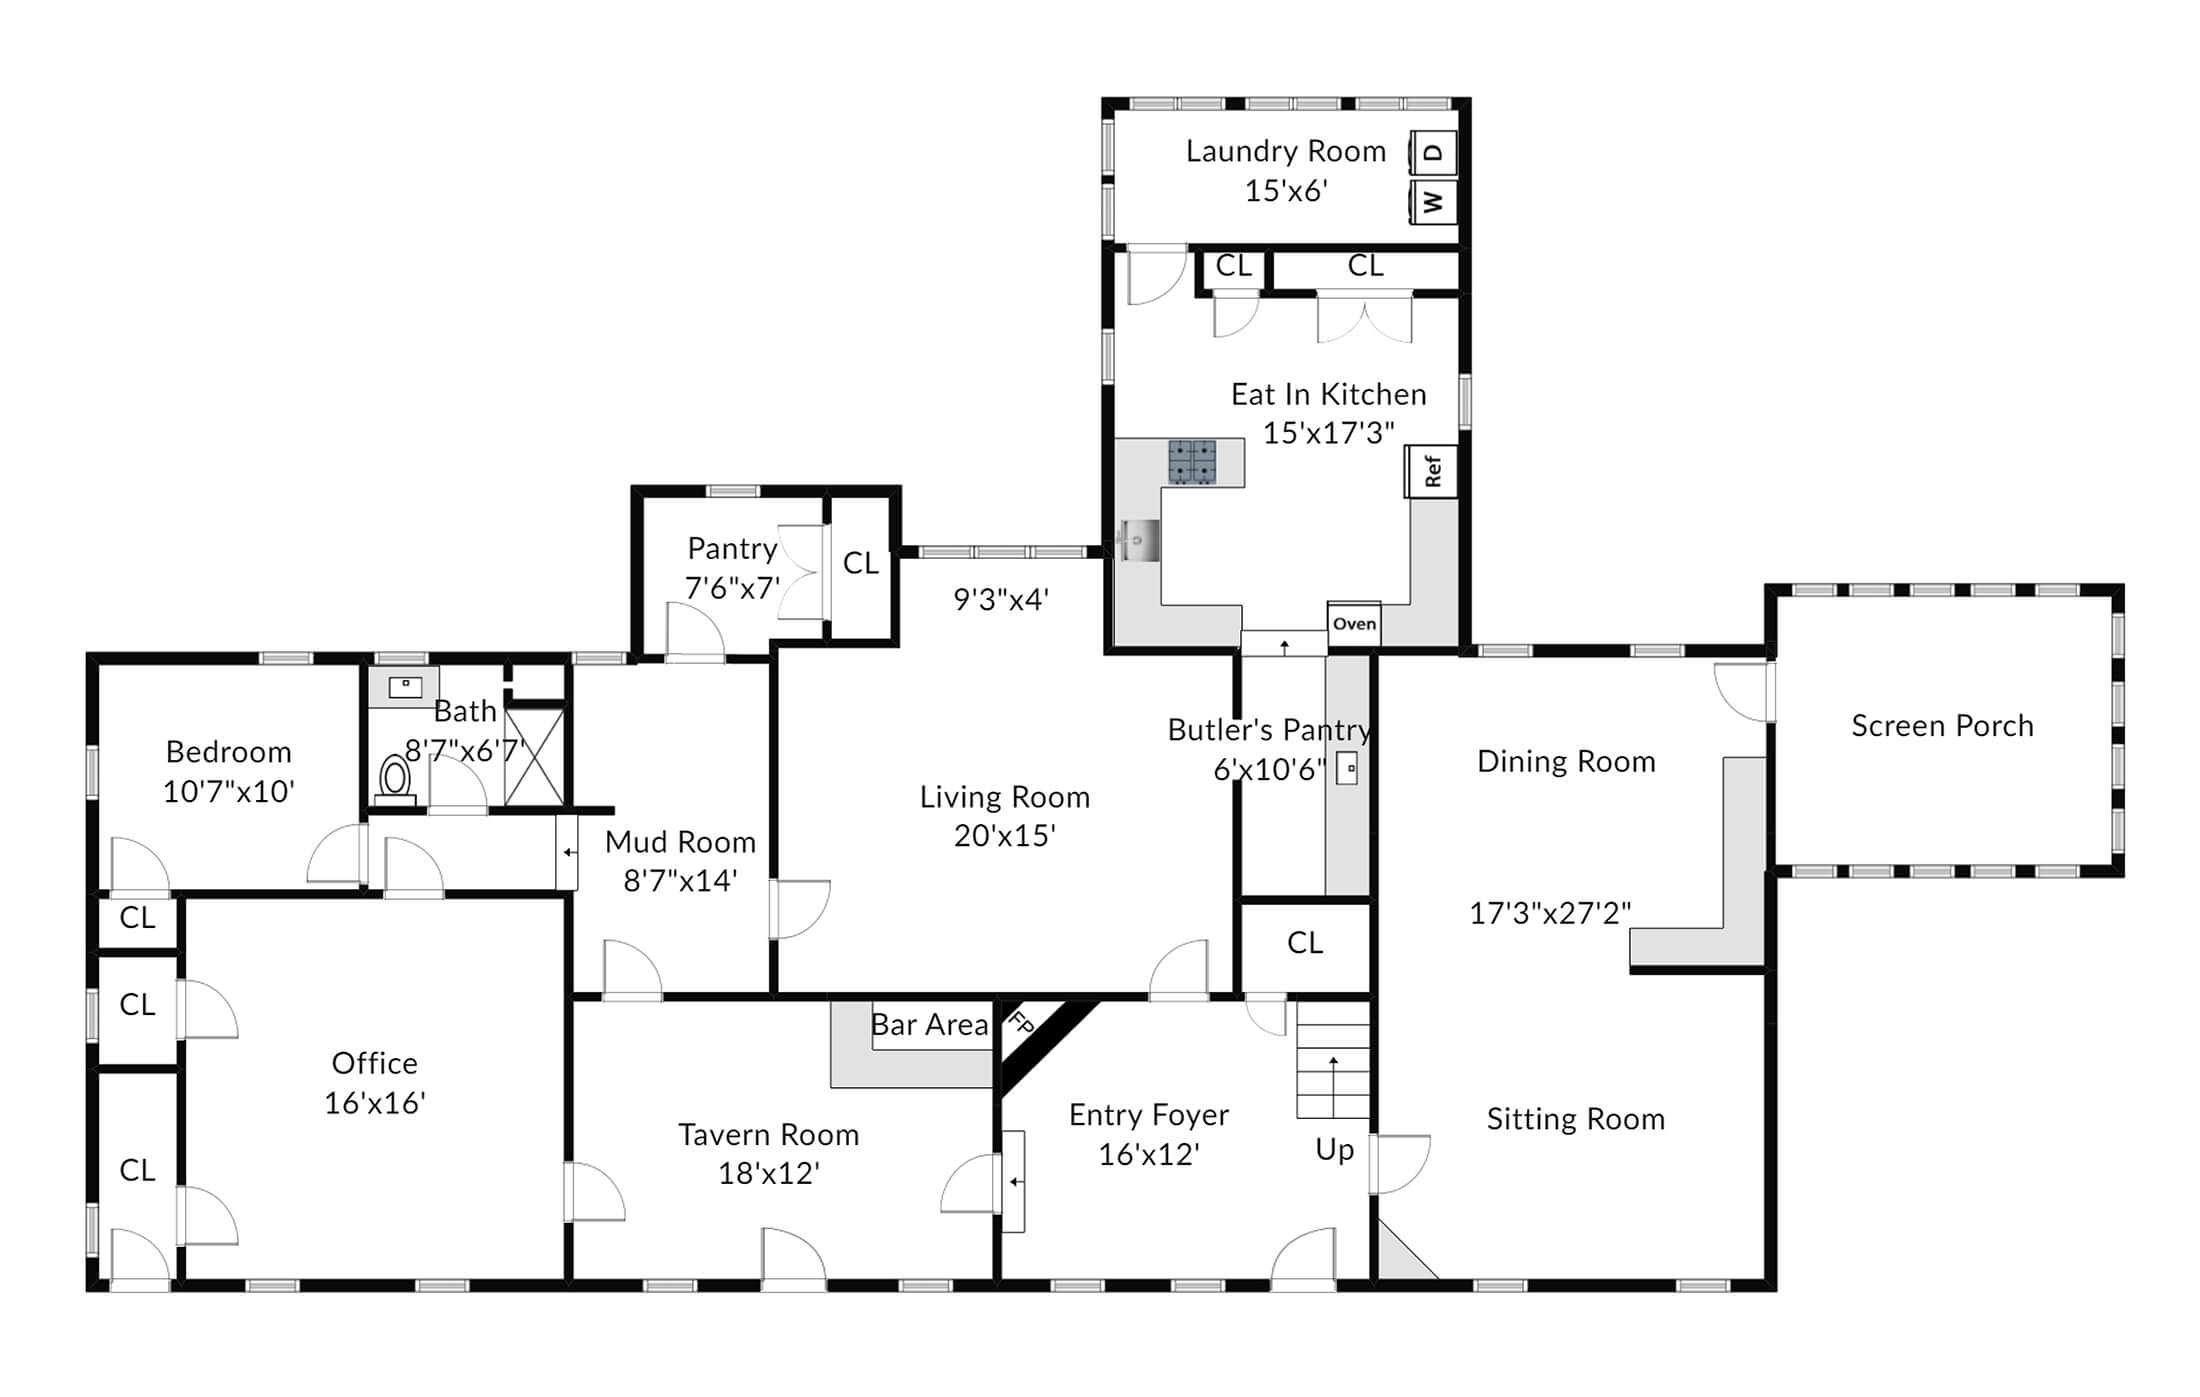 floorplan for the first floor of the house